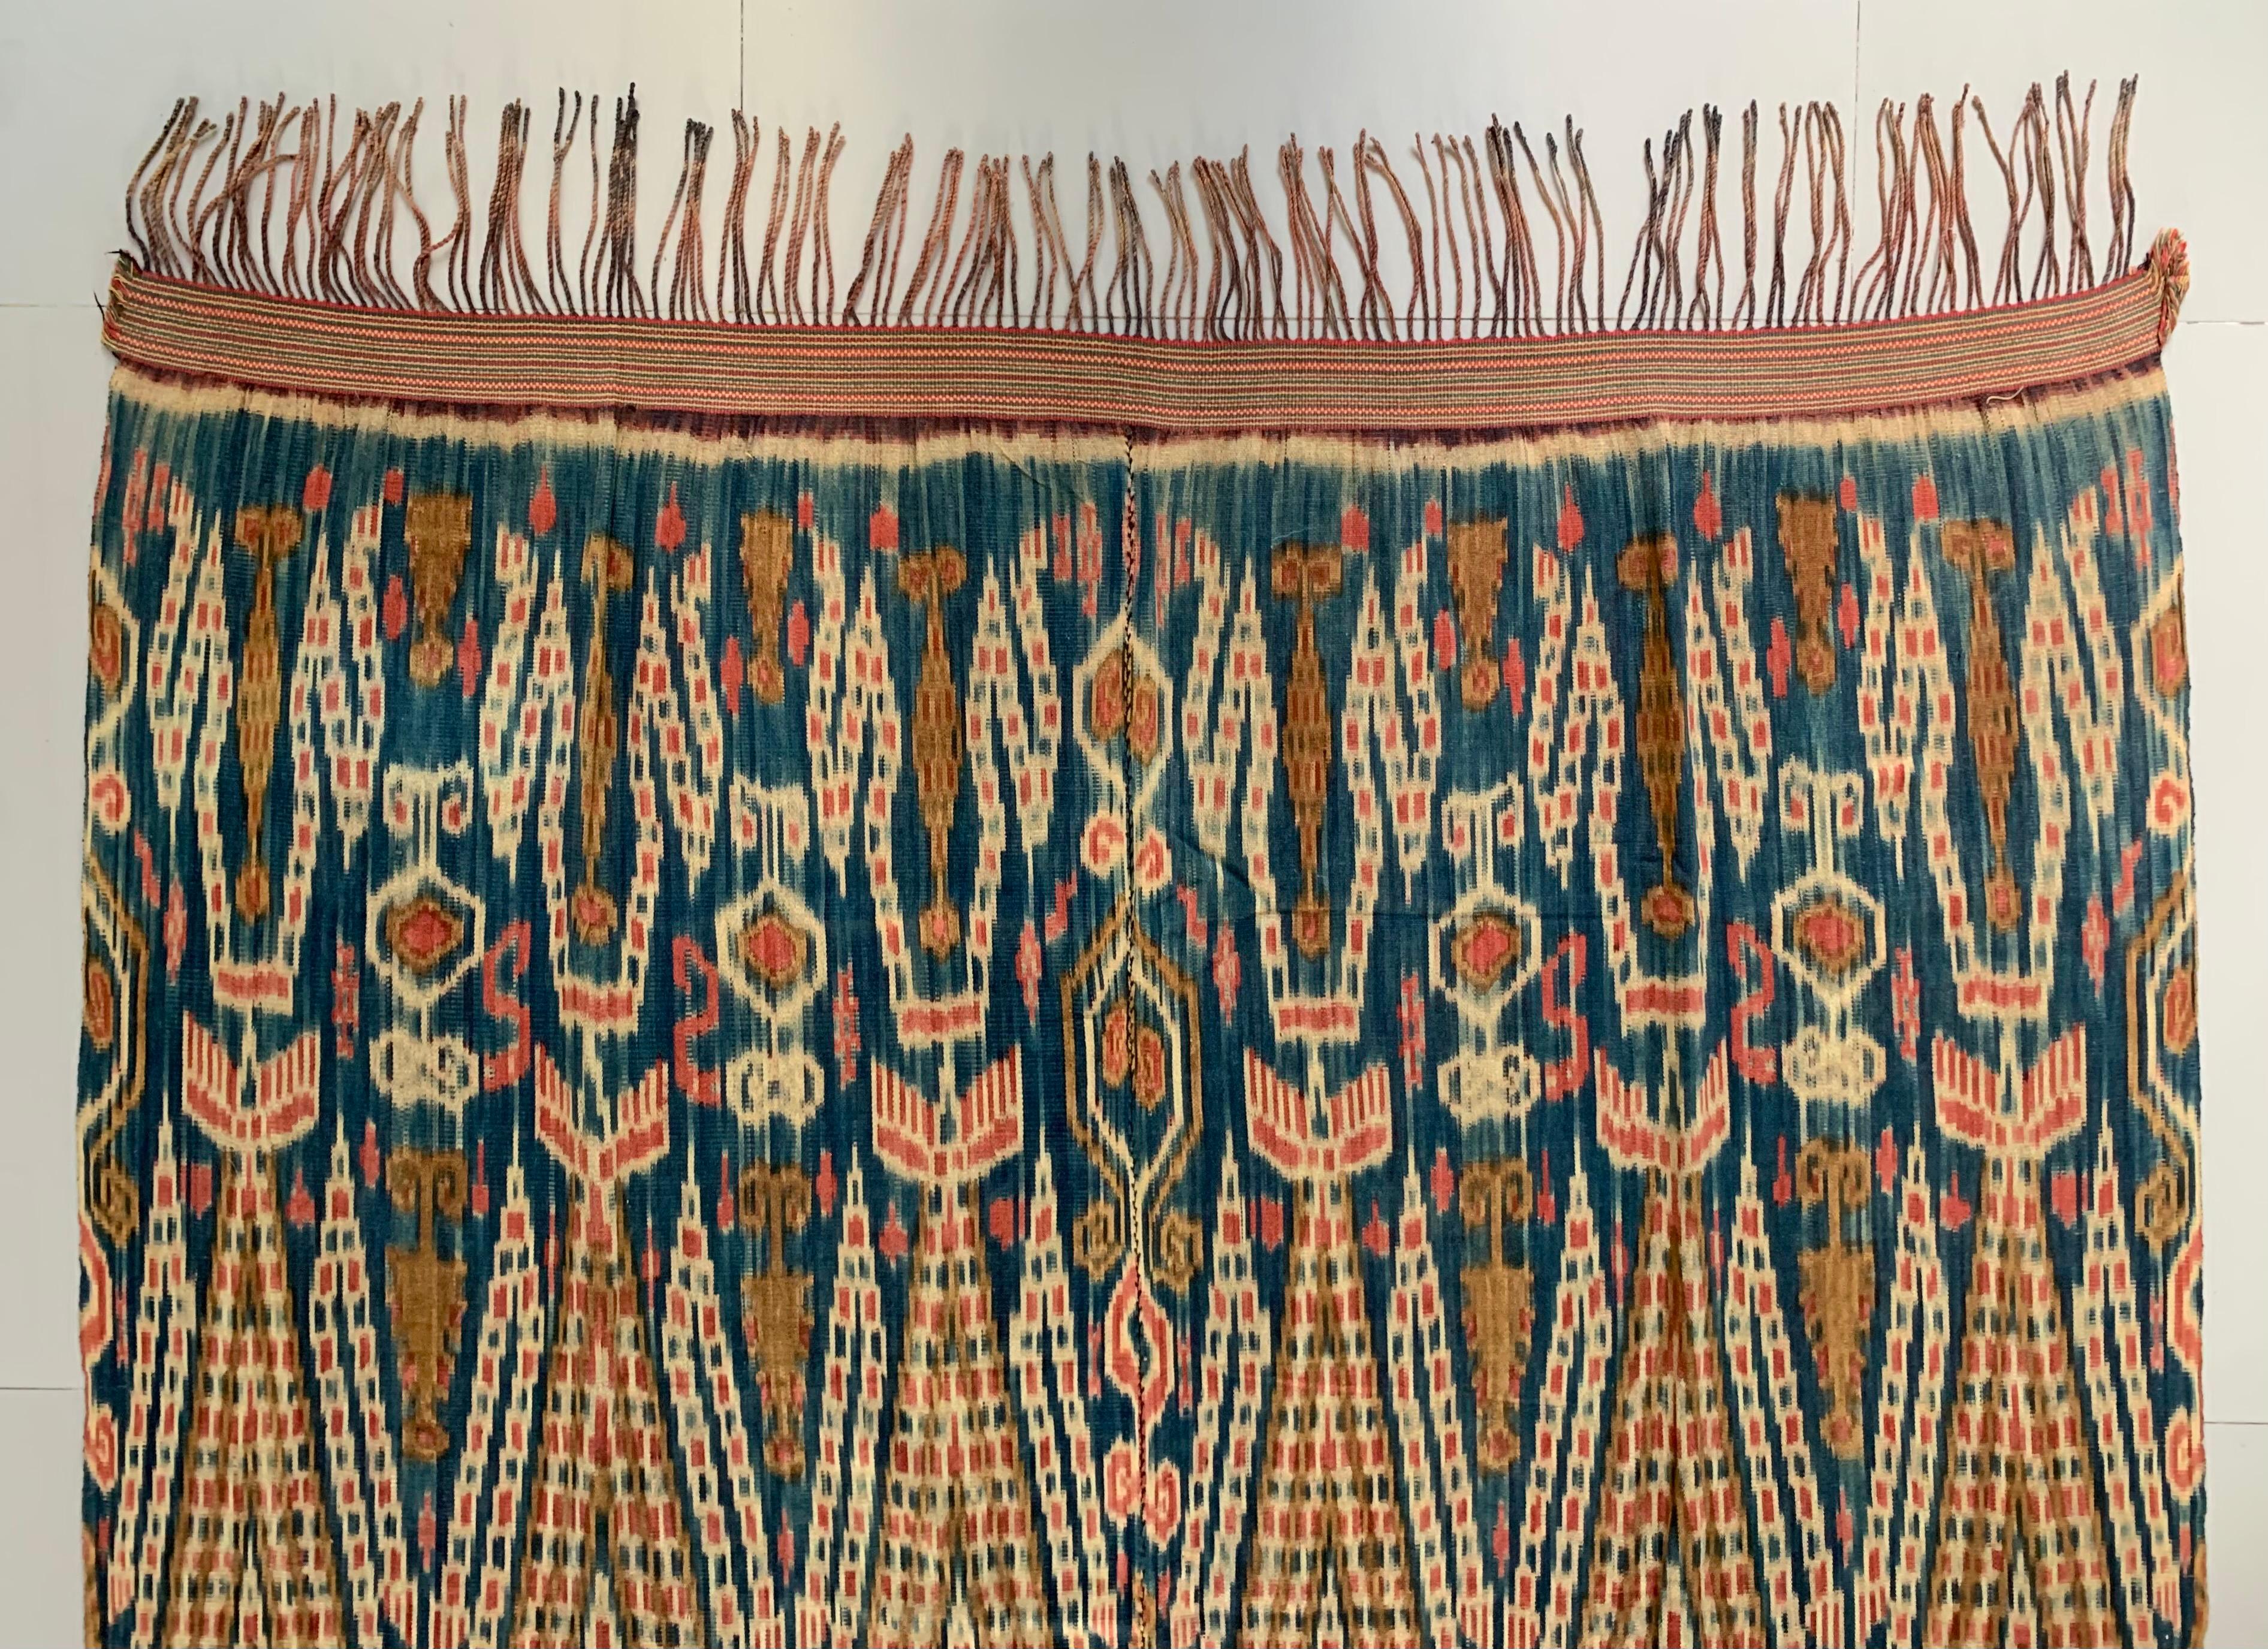 Other Ikat Textile from Sumba Island, Indonesia